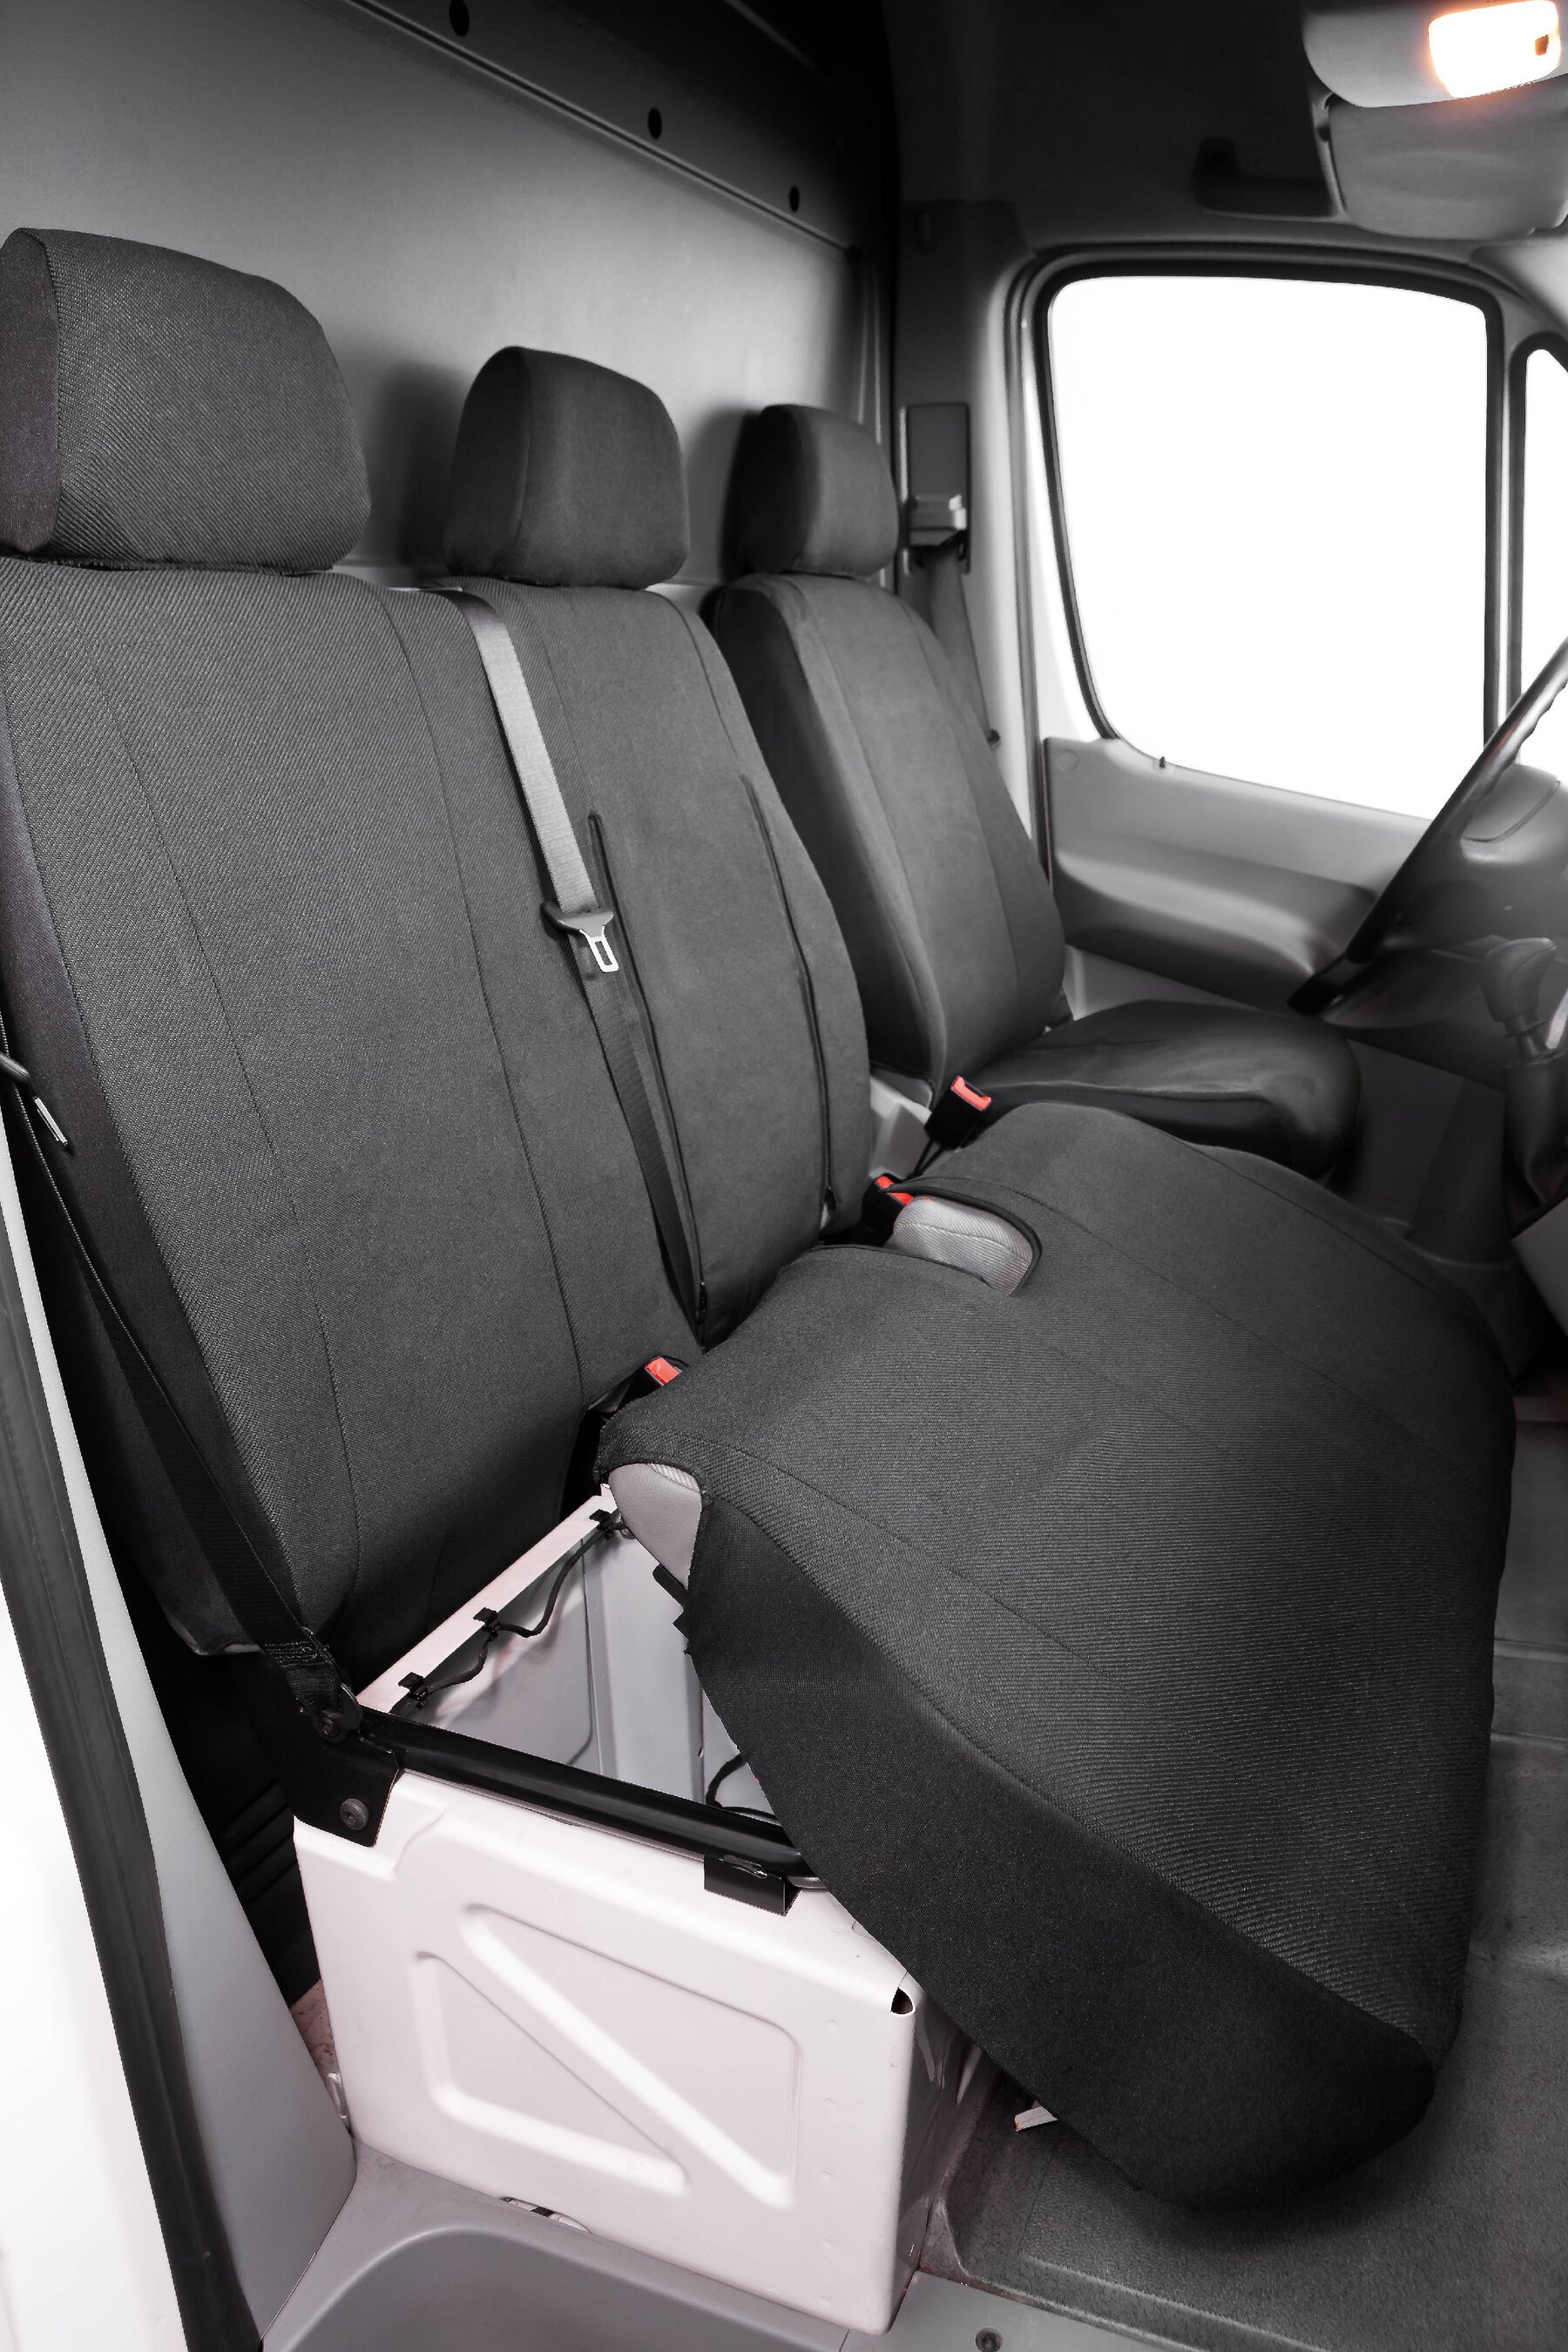 Seat cover made of fabric for VW Crafter, Mercedes Sprinter, single seat cover, double seat cover